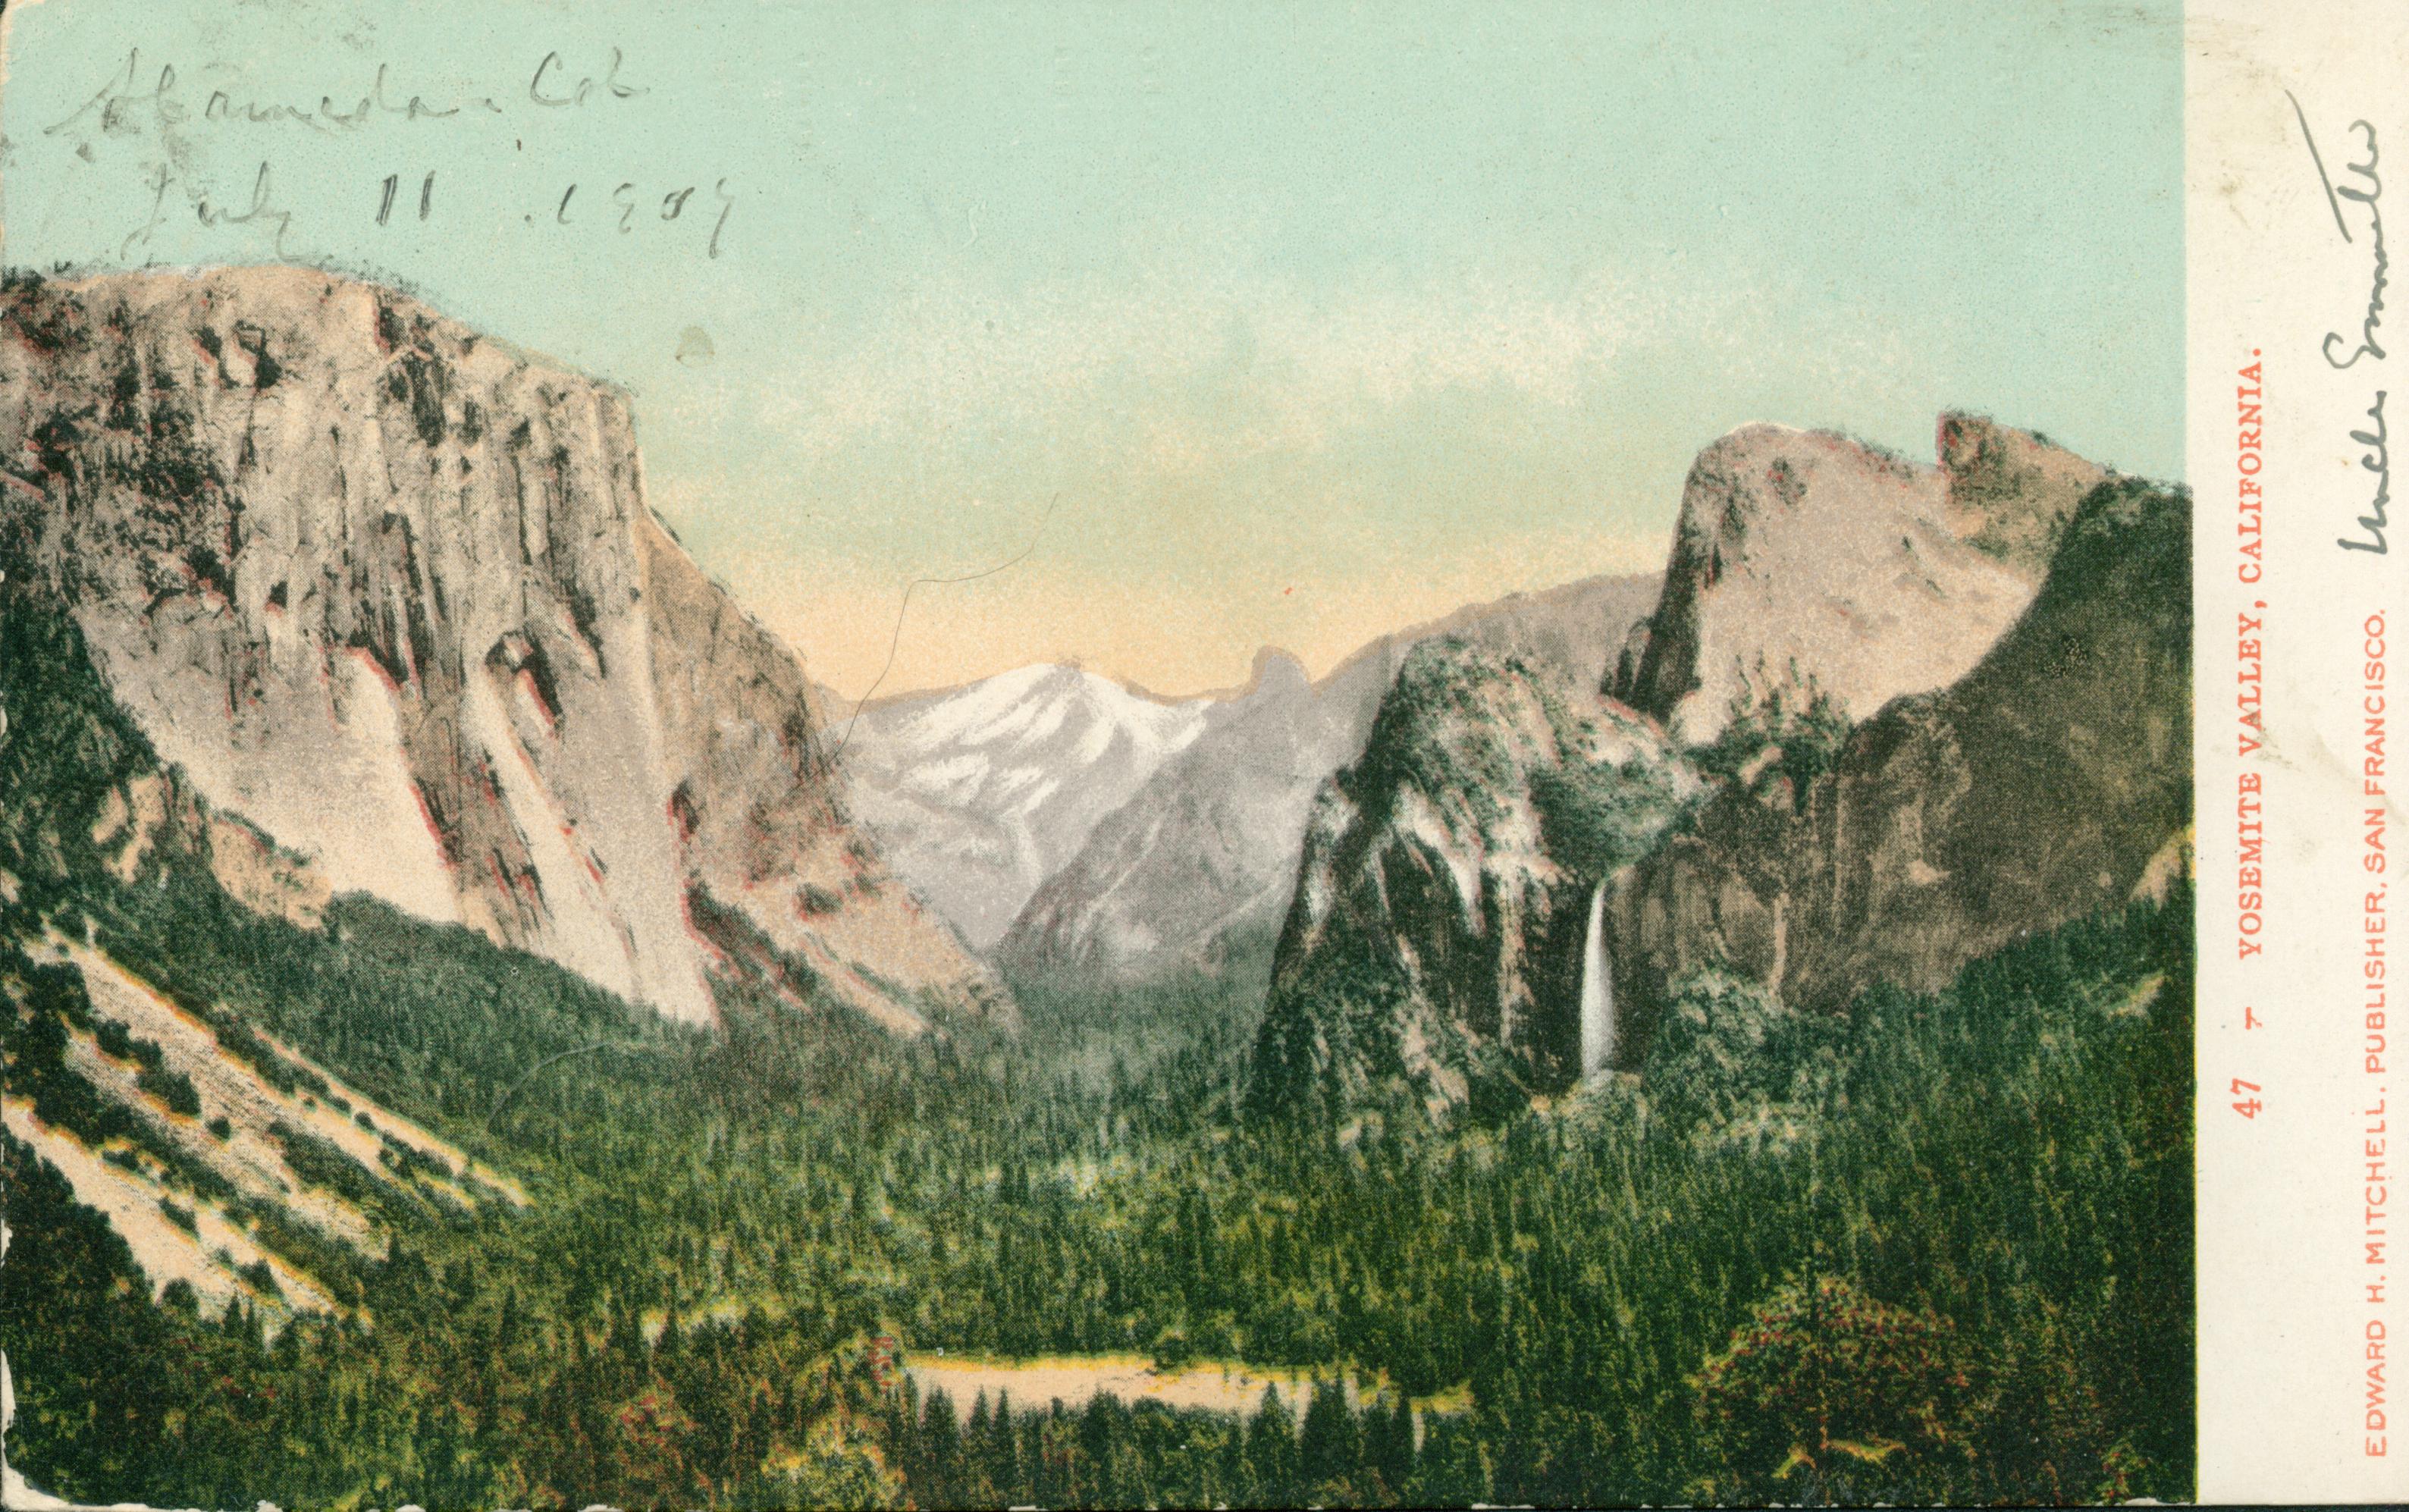 Shows a view of the Yosemite Valley